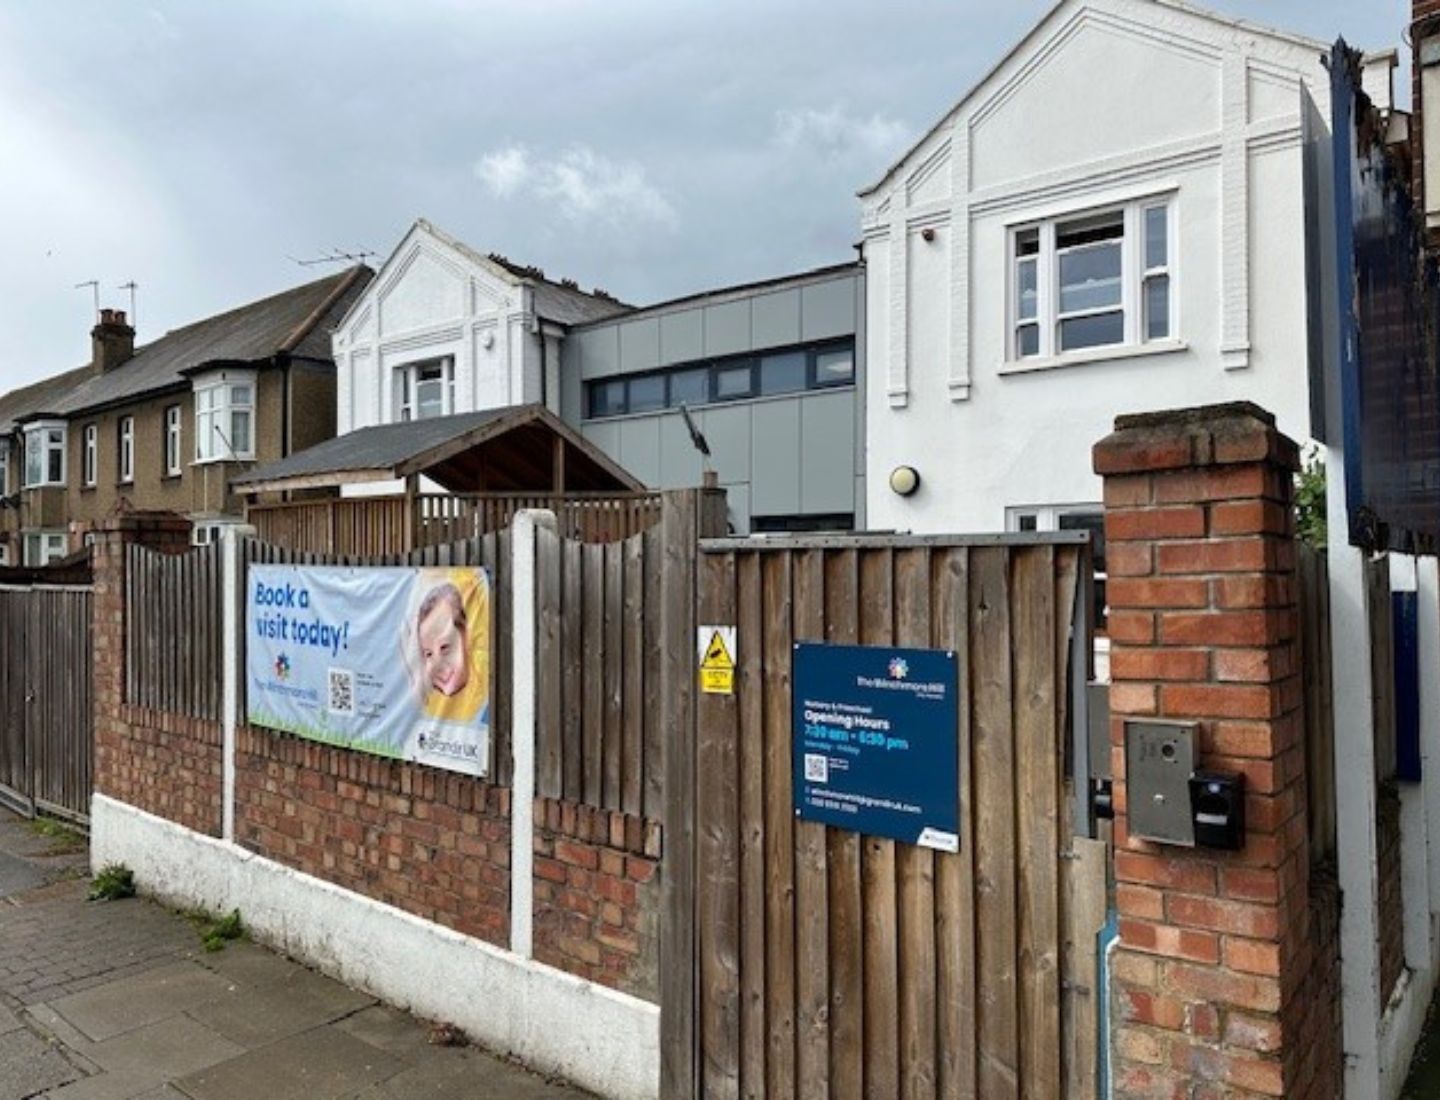 The Winchmore Hill Day Nursery